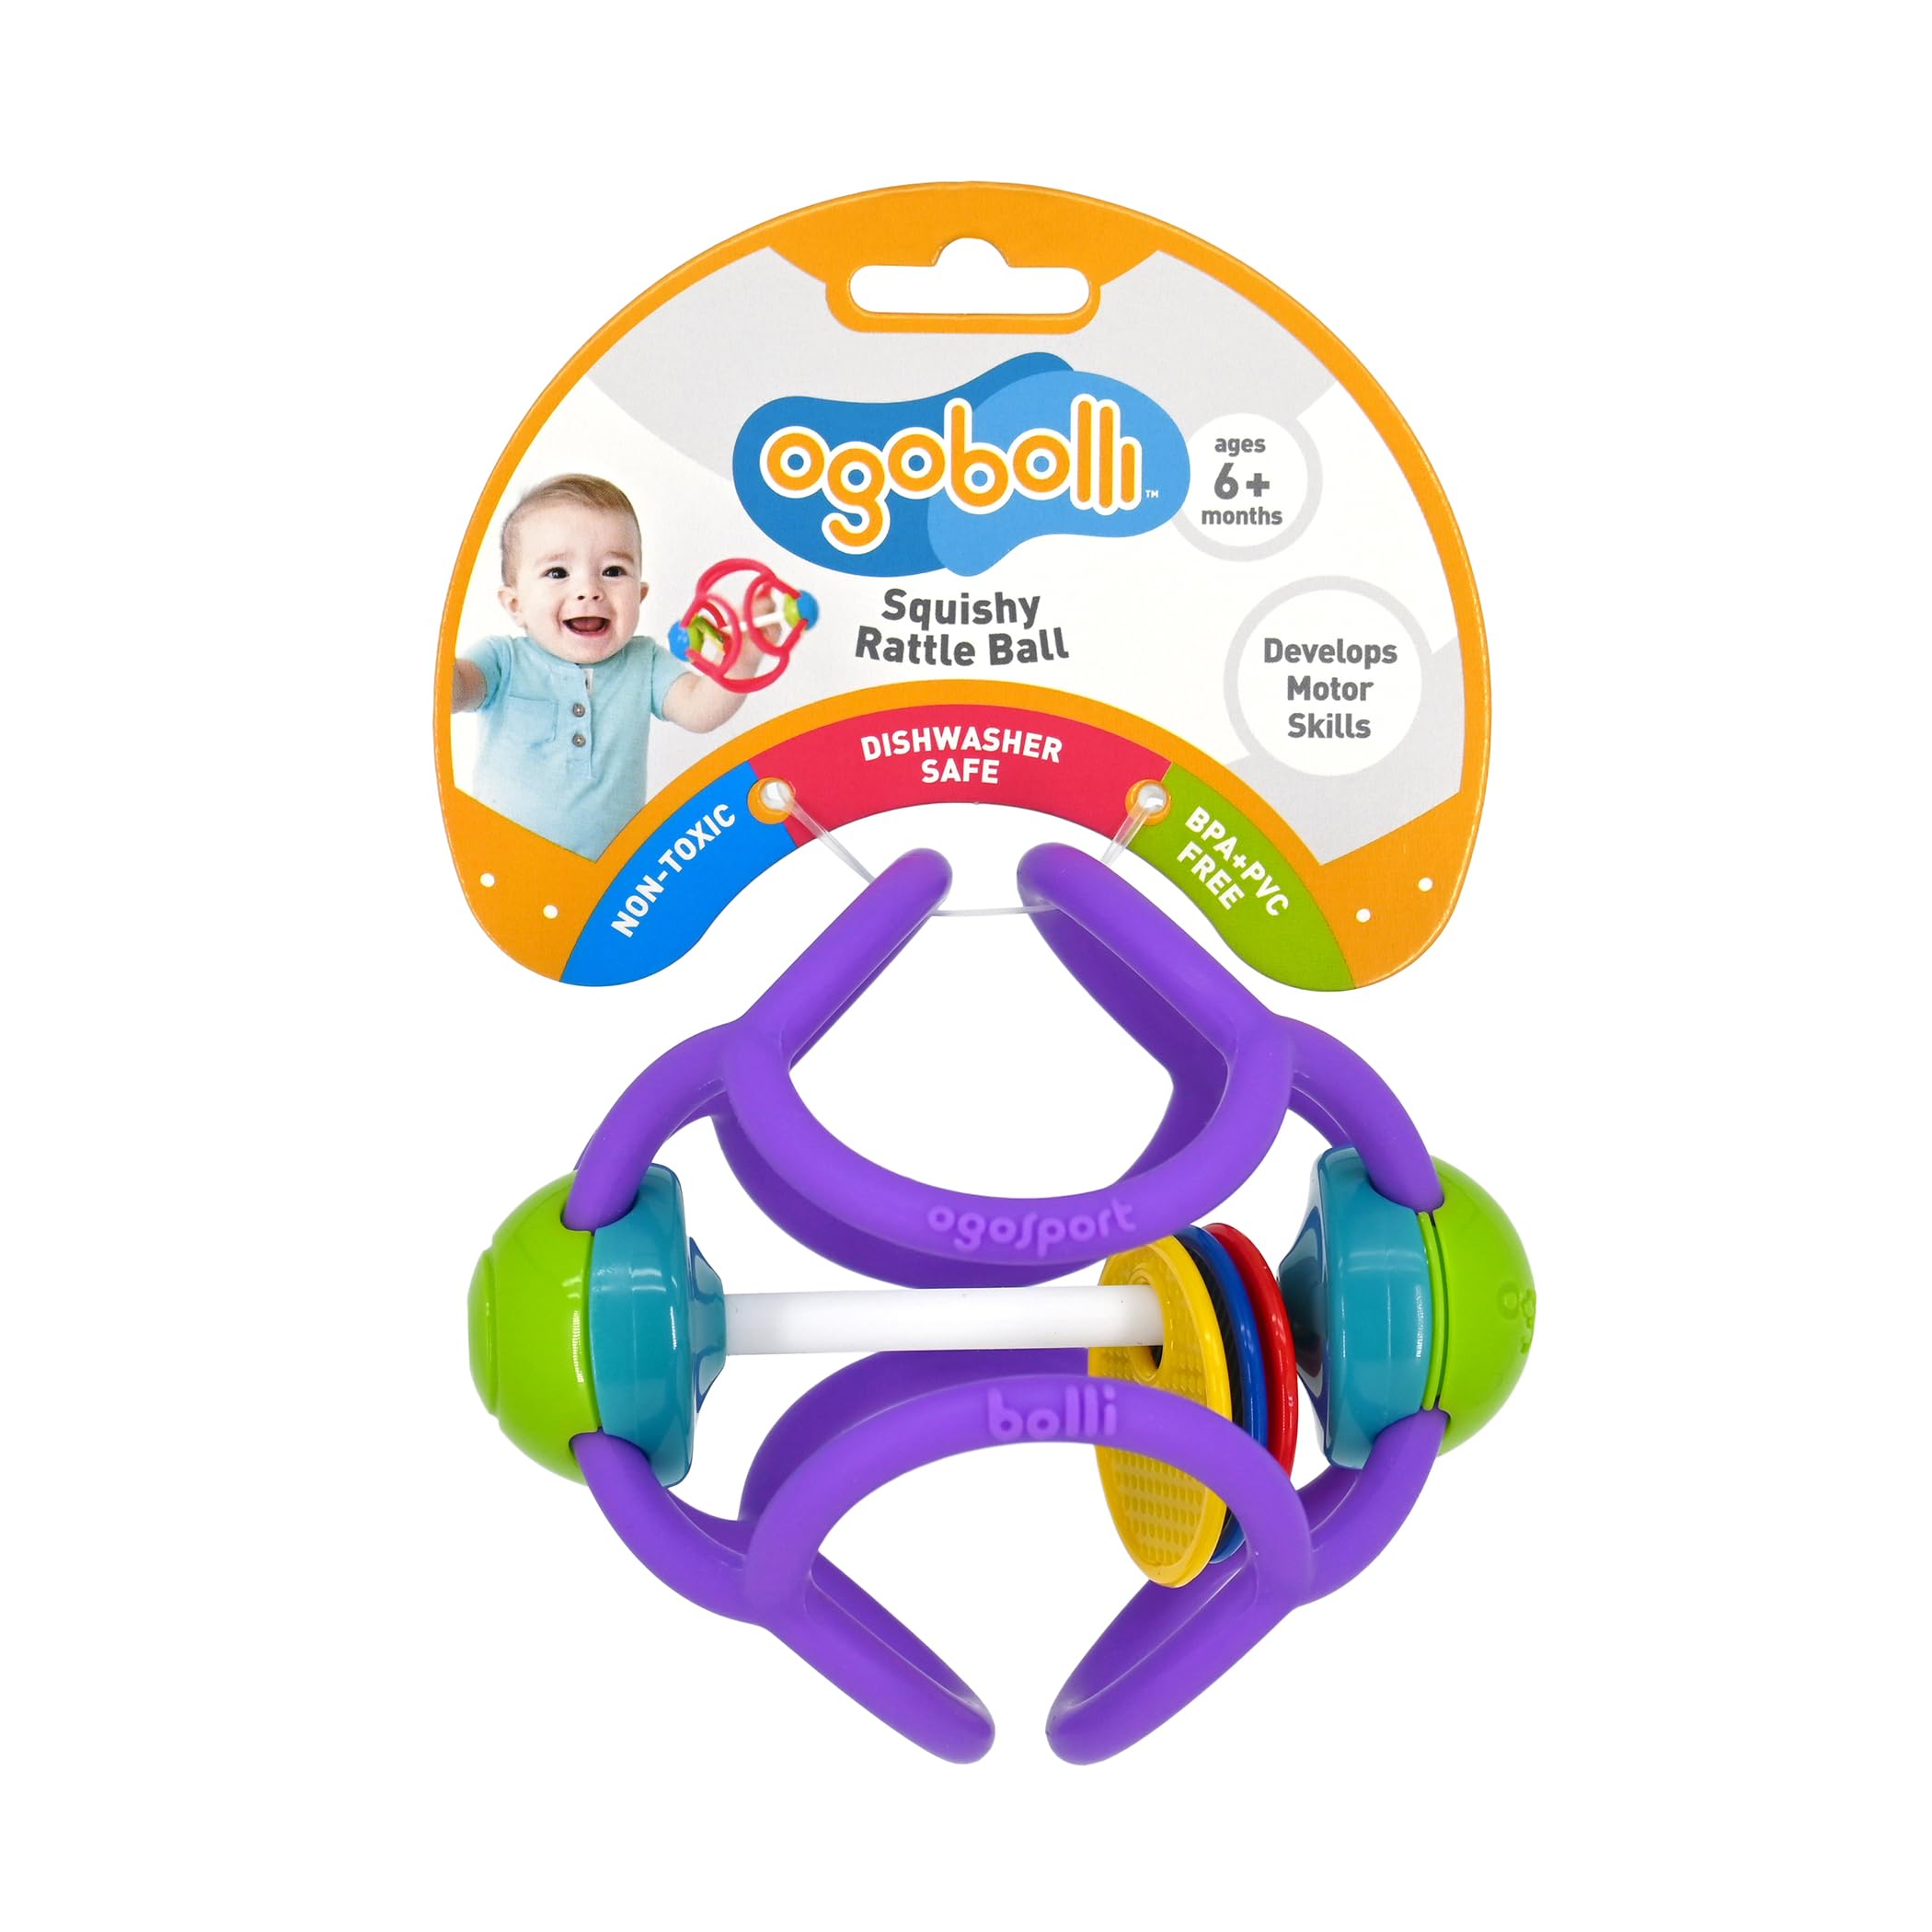 OgoBolli Teether Ring Tactile Sensory Ball and Baby Rattle Toy for Babies & Toddlers - Stretchy, Squishy, Soft, Non-Toxic Silicone - Boys and Girls Age 6+ Months - Purple